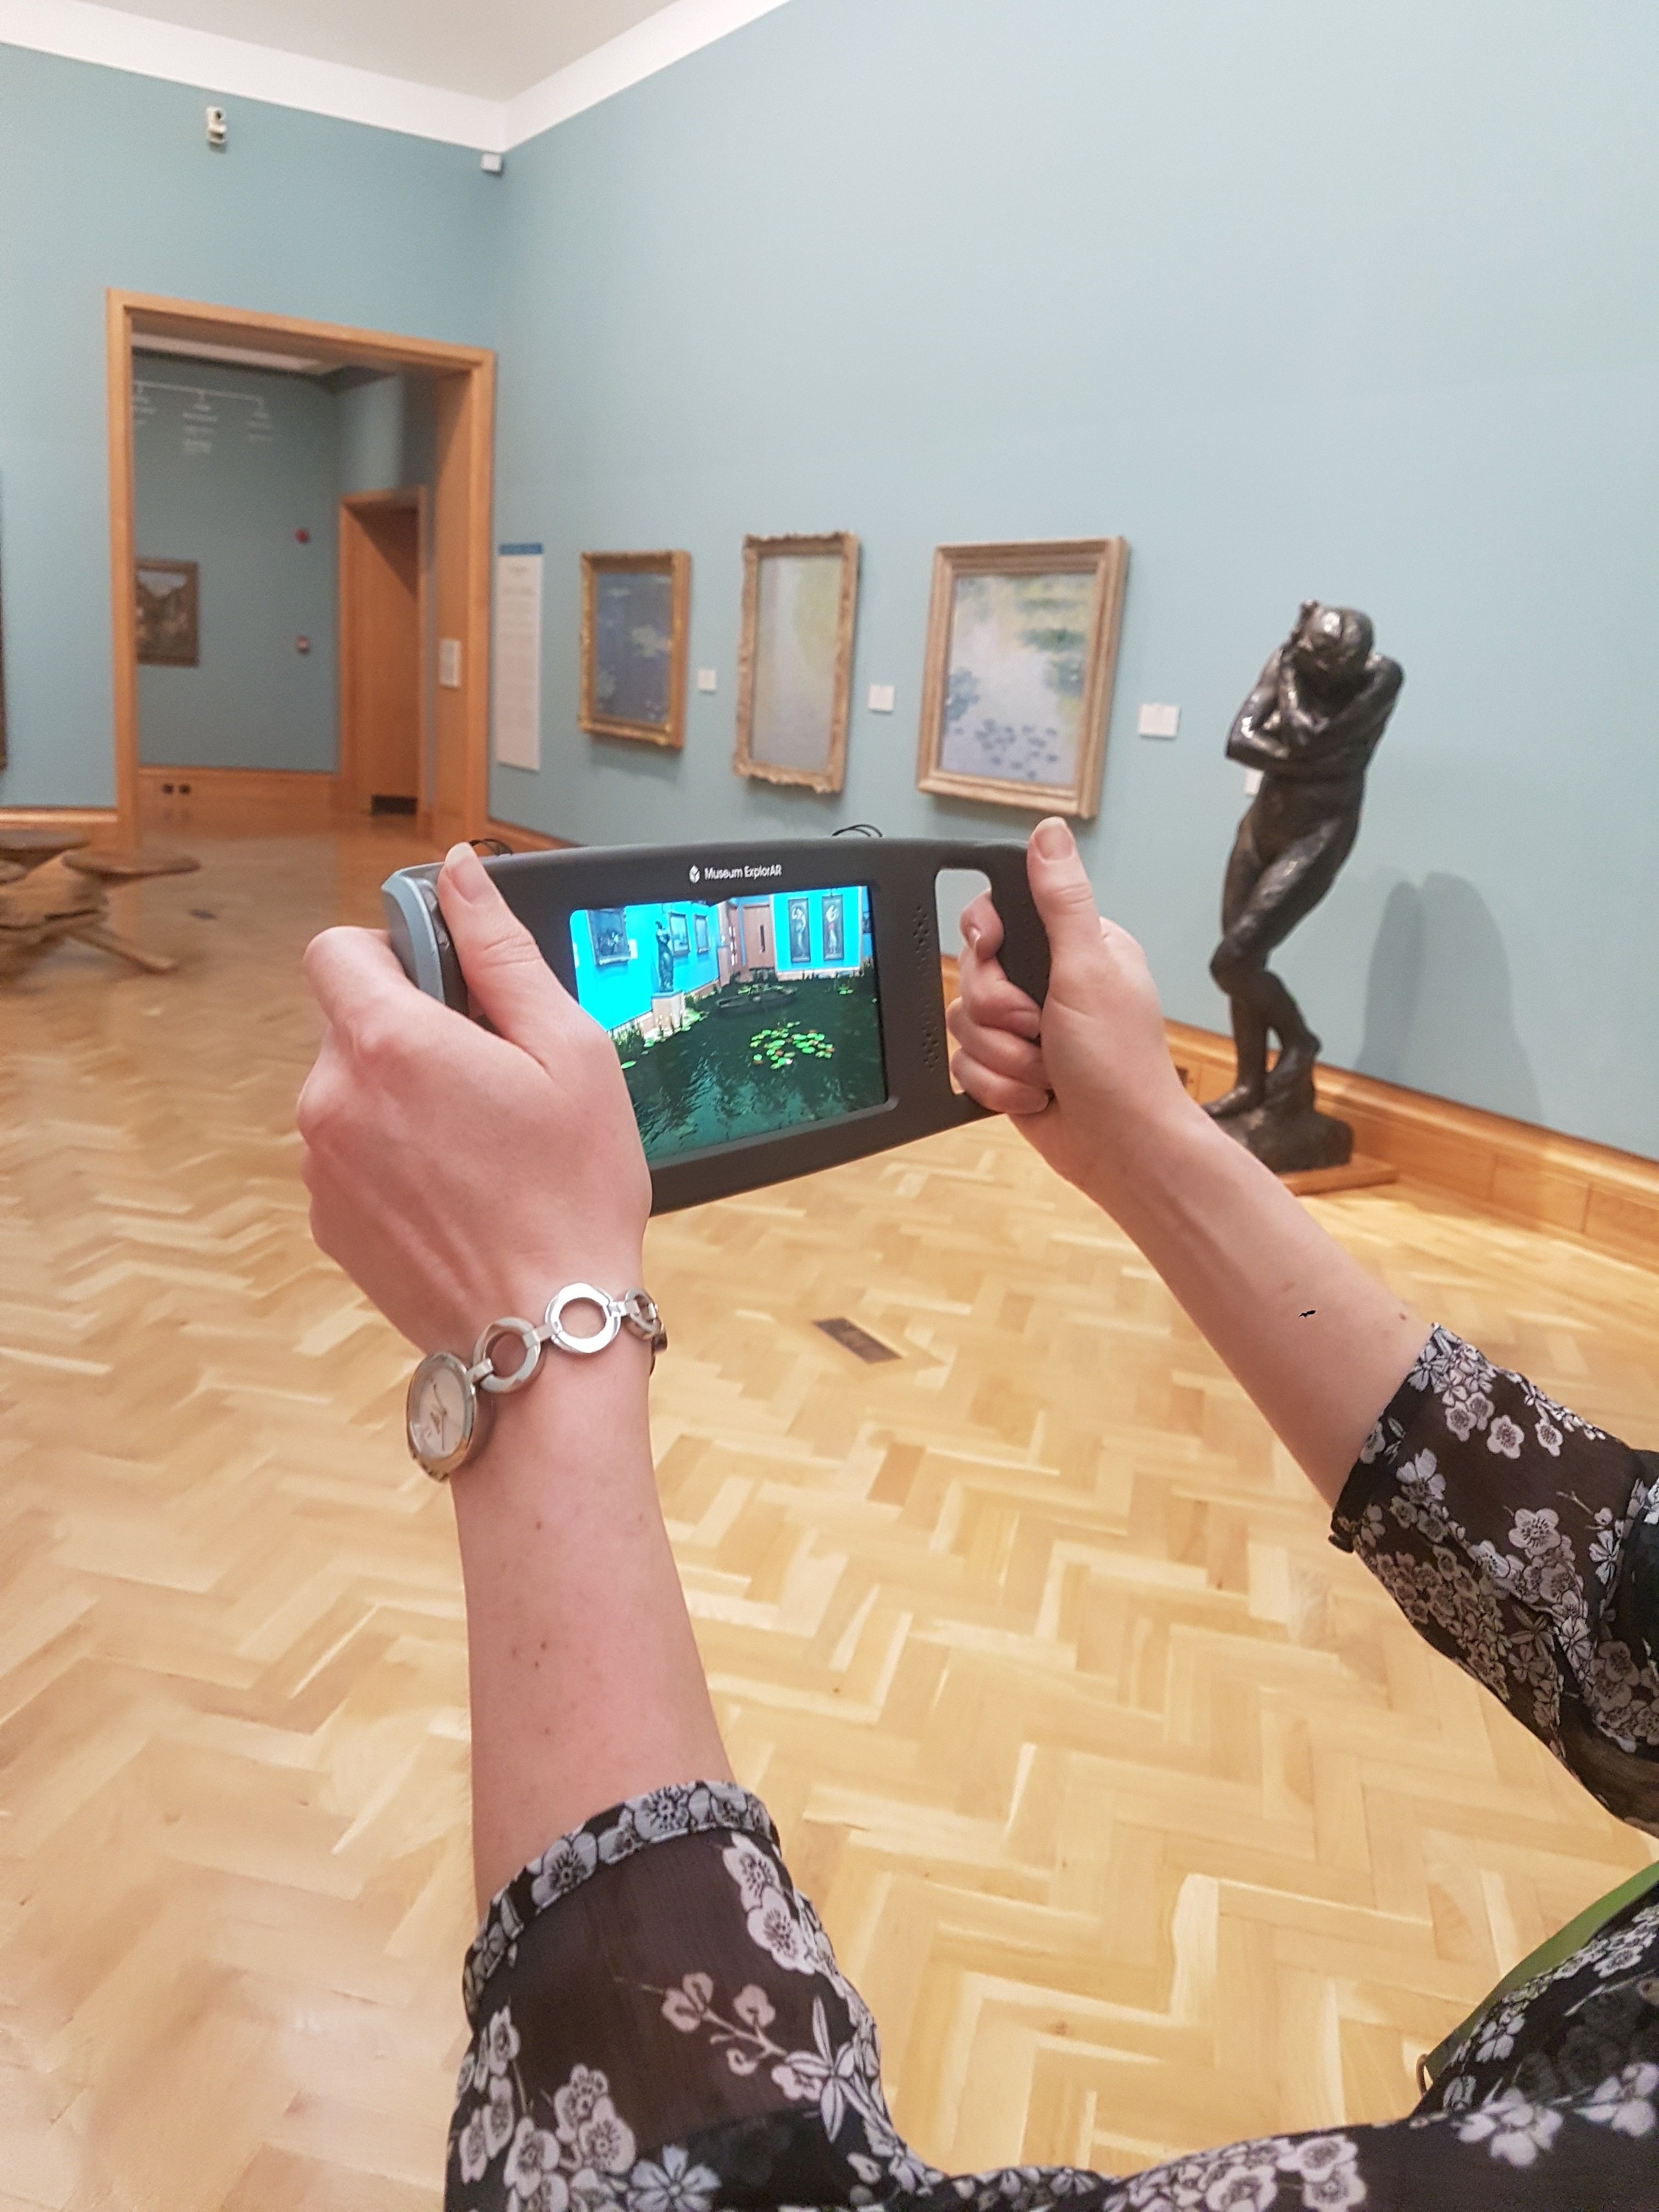 View of device in the gallery showing augmented reality on the screen